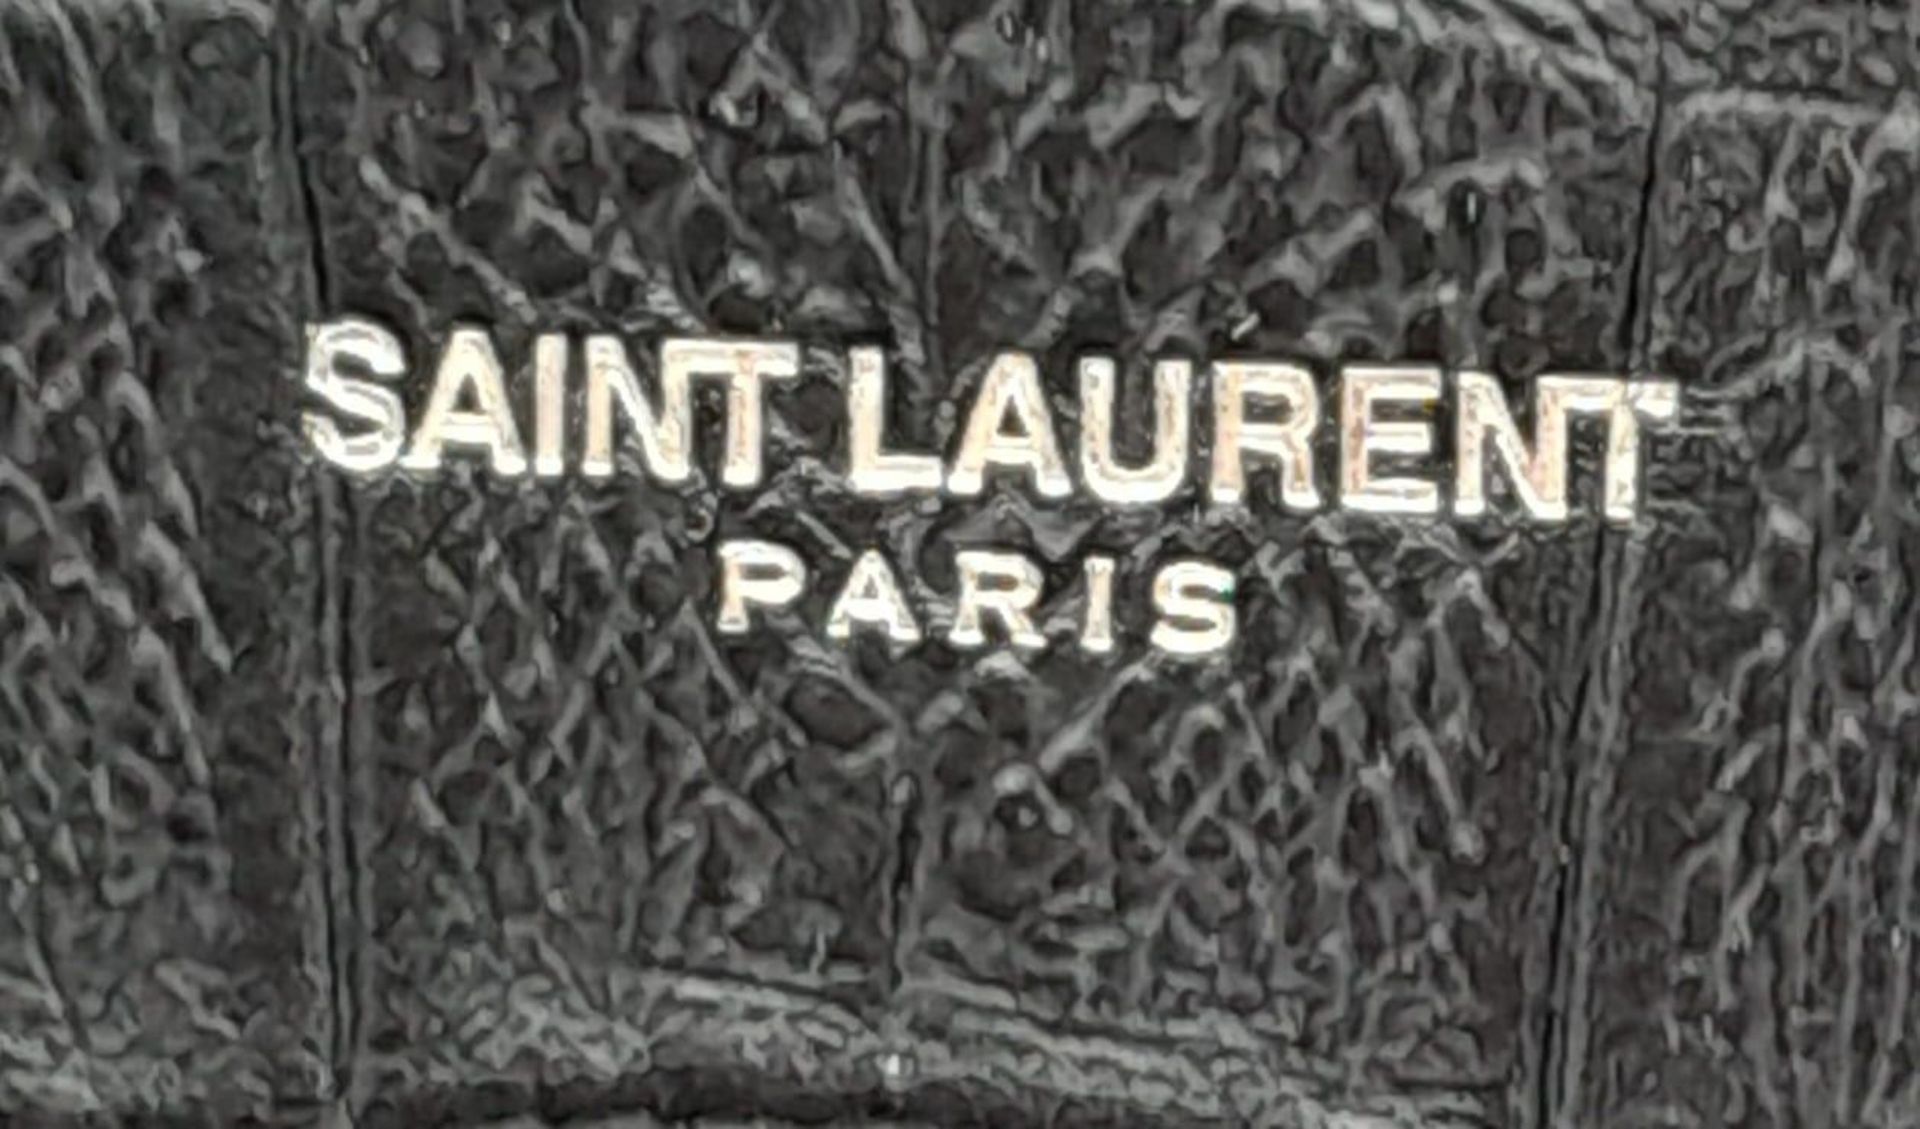 A Saint Laurent Sac de Jour Handbag. Crocodile embossed leather exterior with silver hardware and - Image 20 of 21